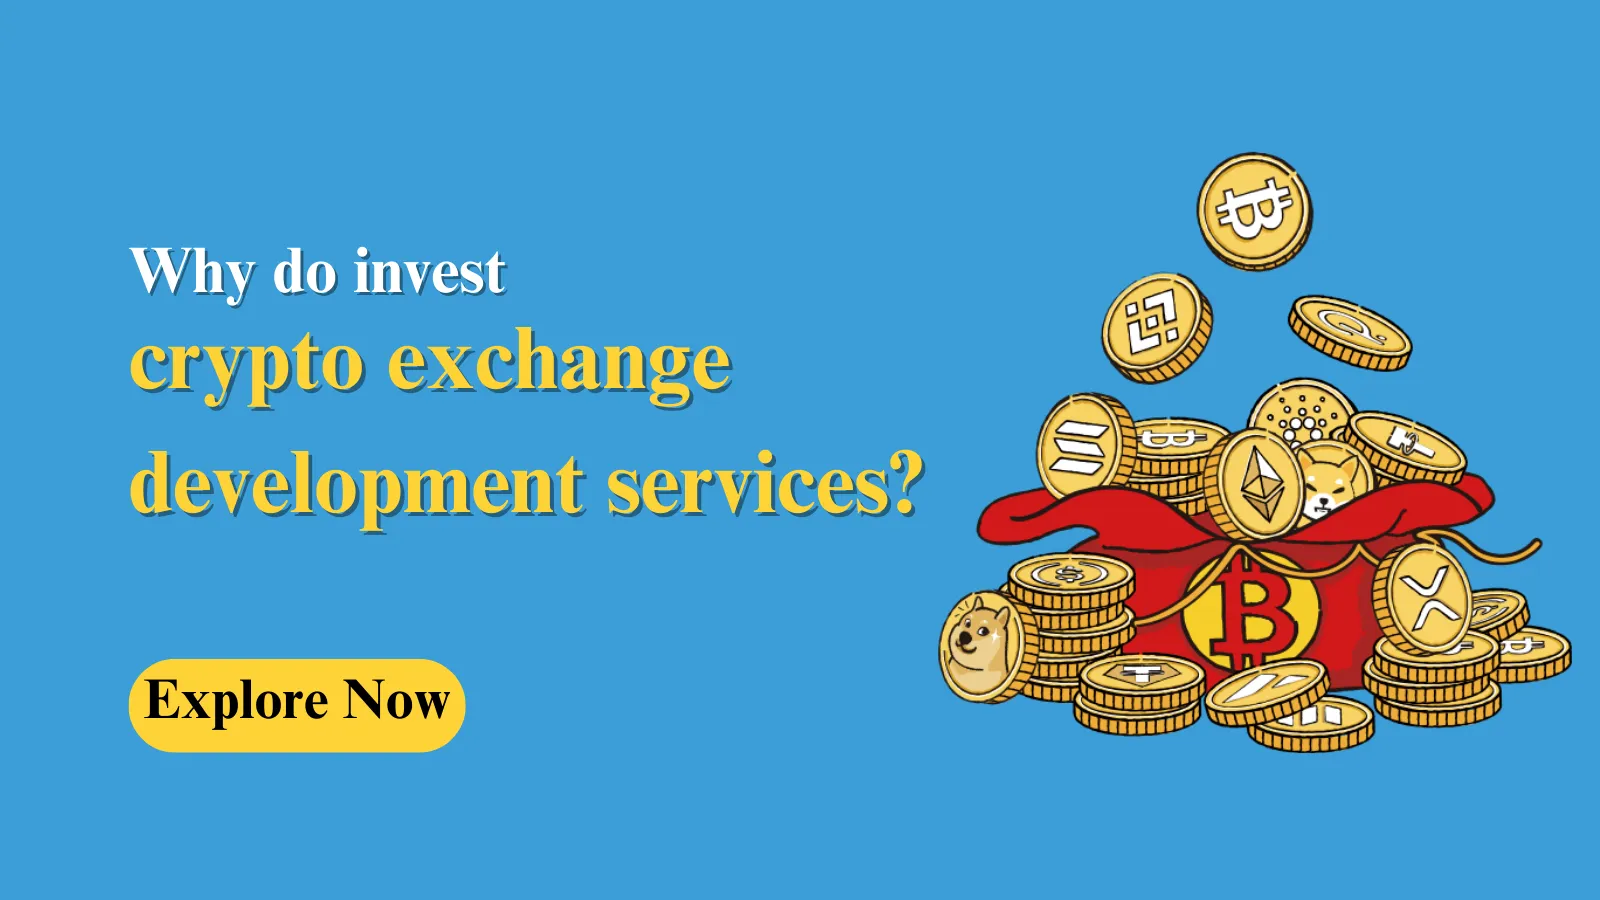 Why do invest crypto exchange development services?